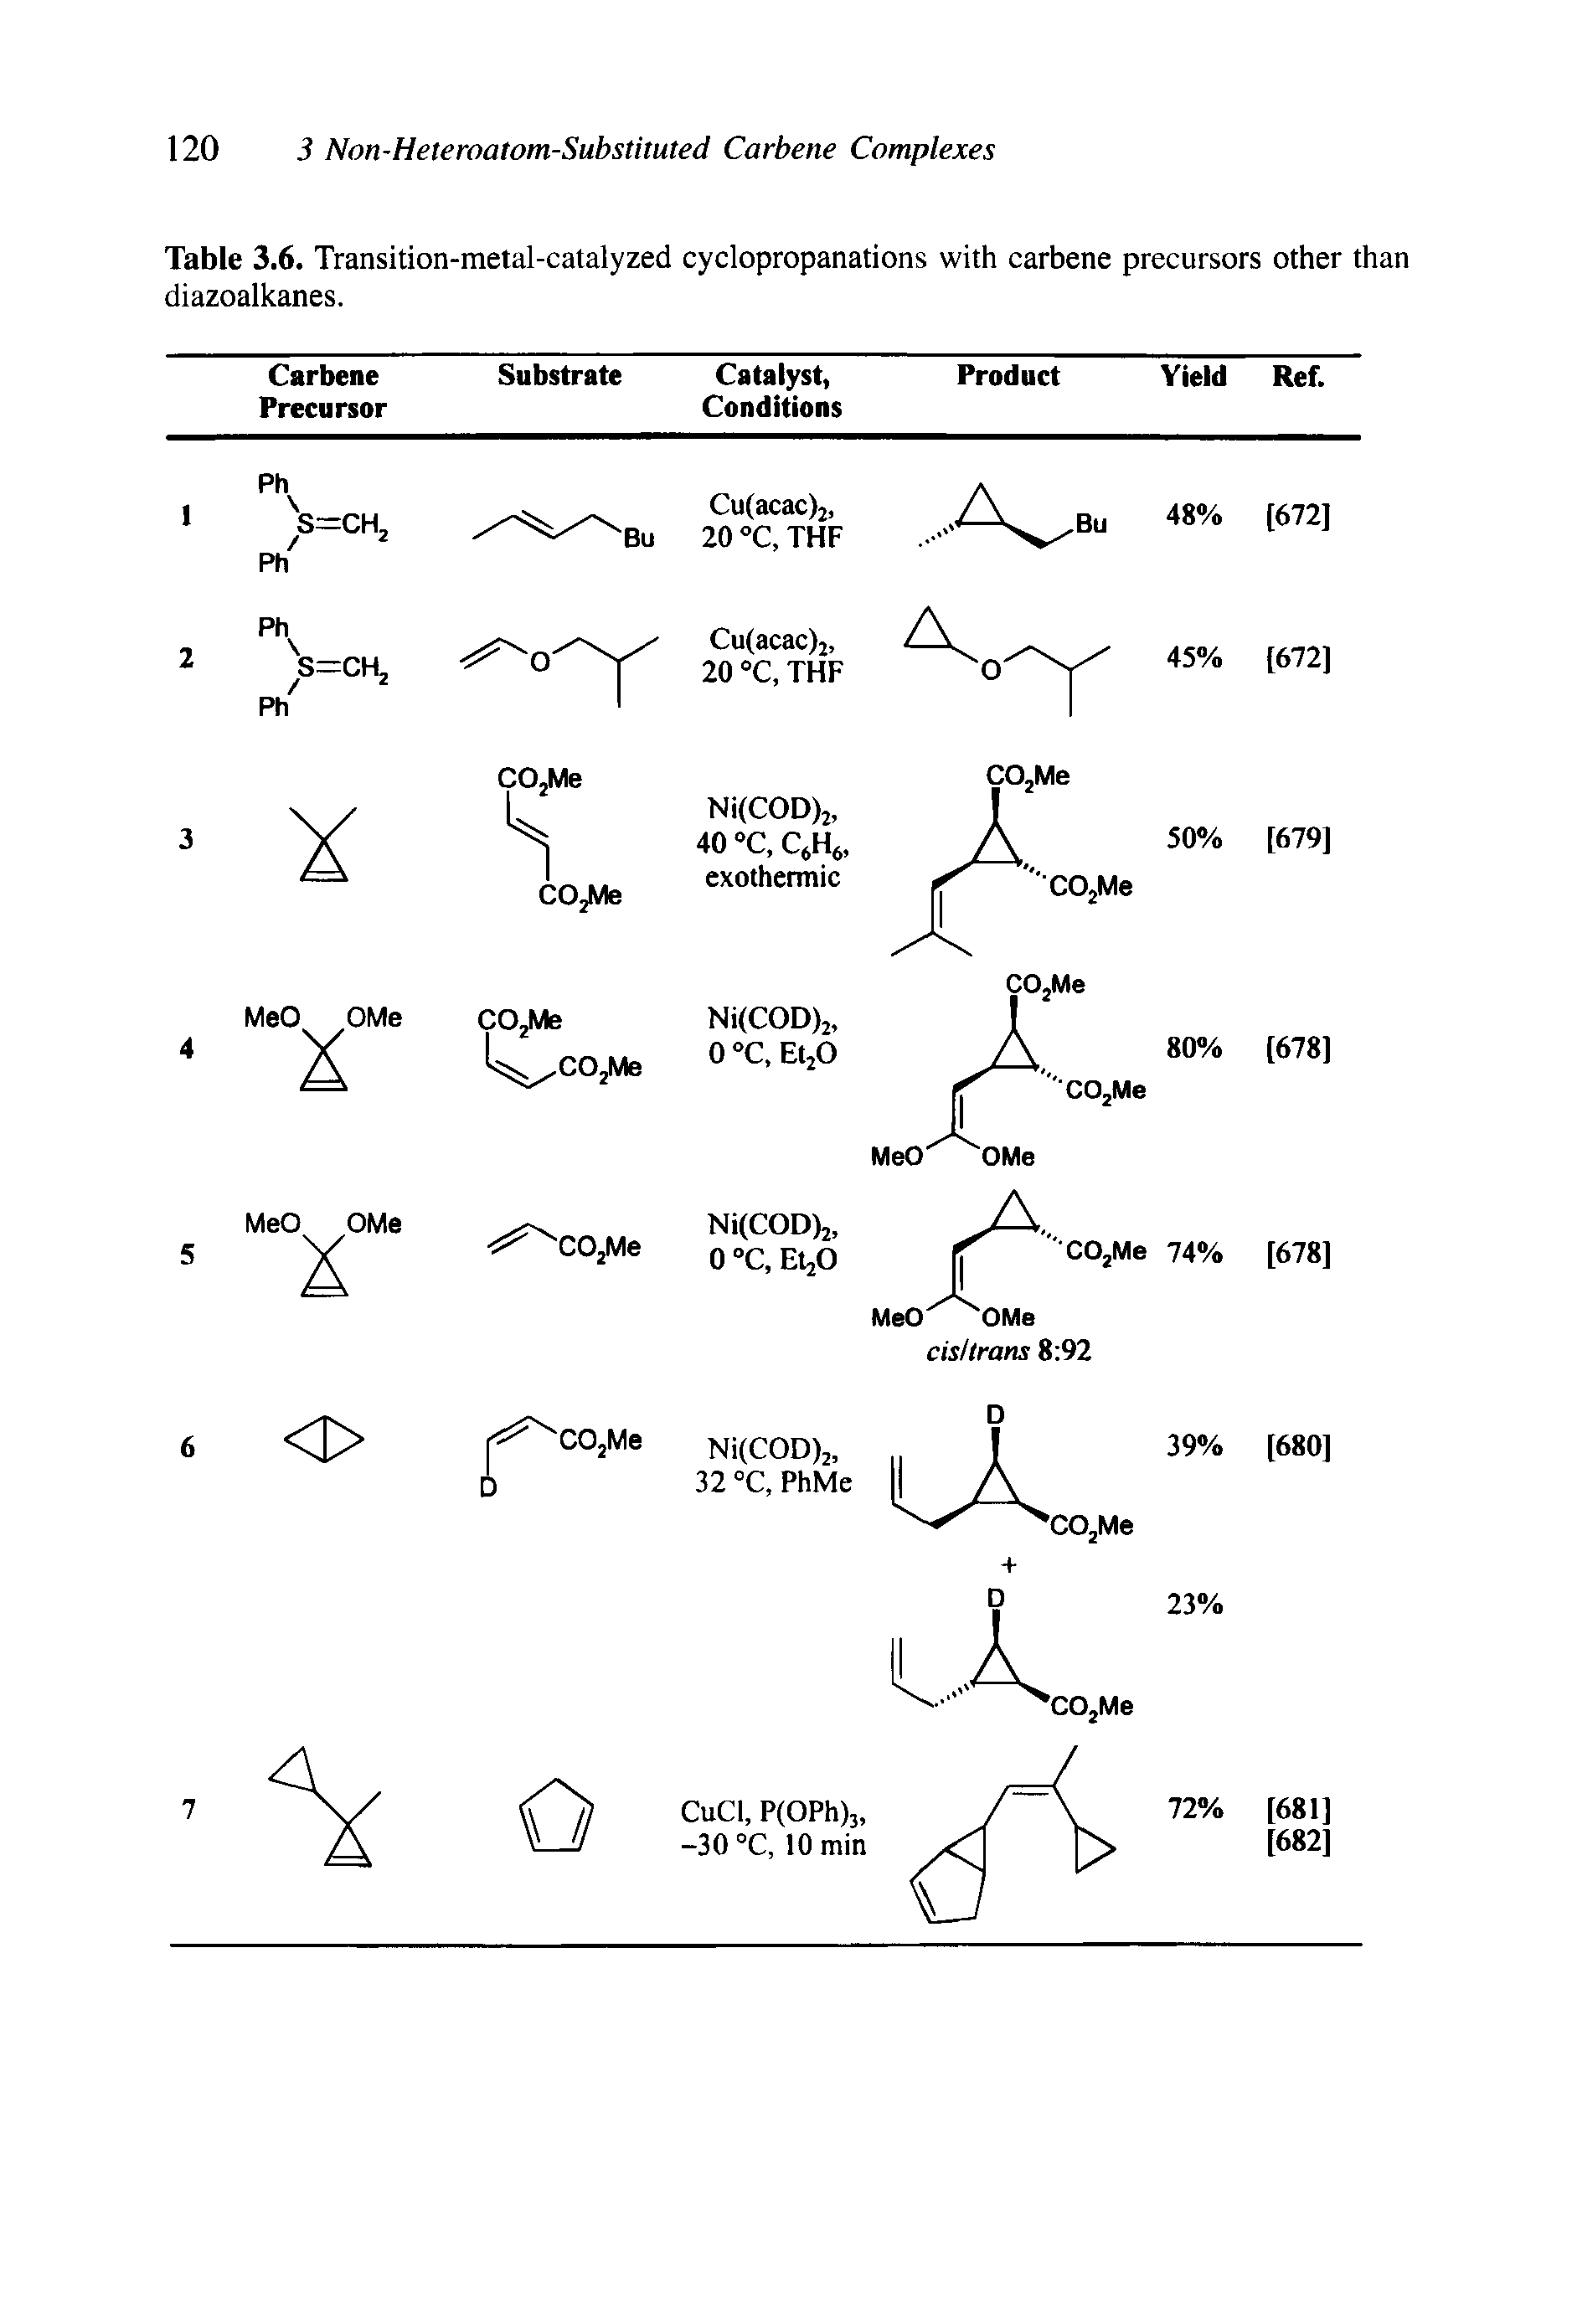 Table 3.6. Transition-metal-catalyzed cyclopropanations with carbene precursors other than diazoalkanes.